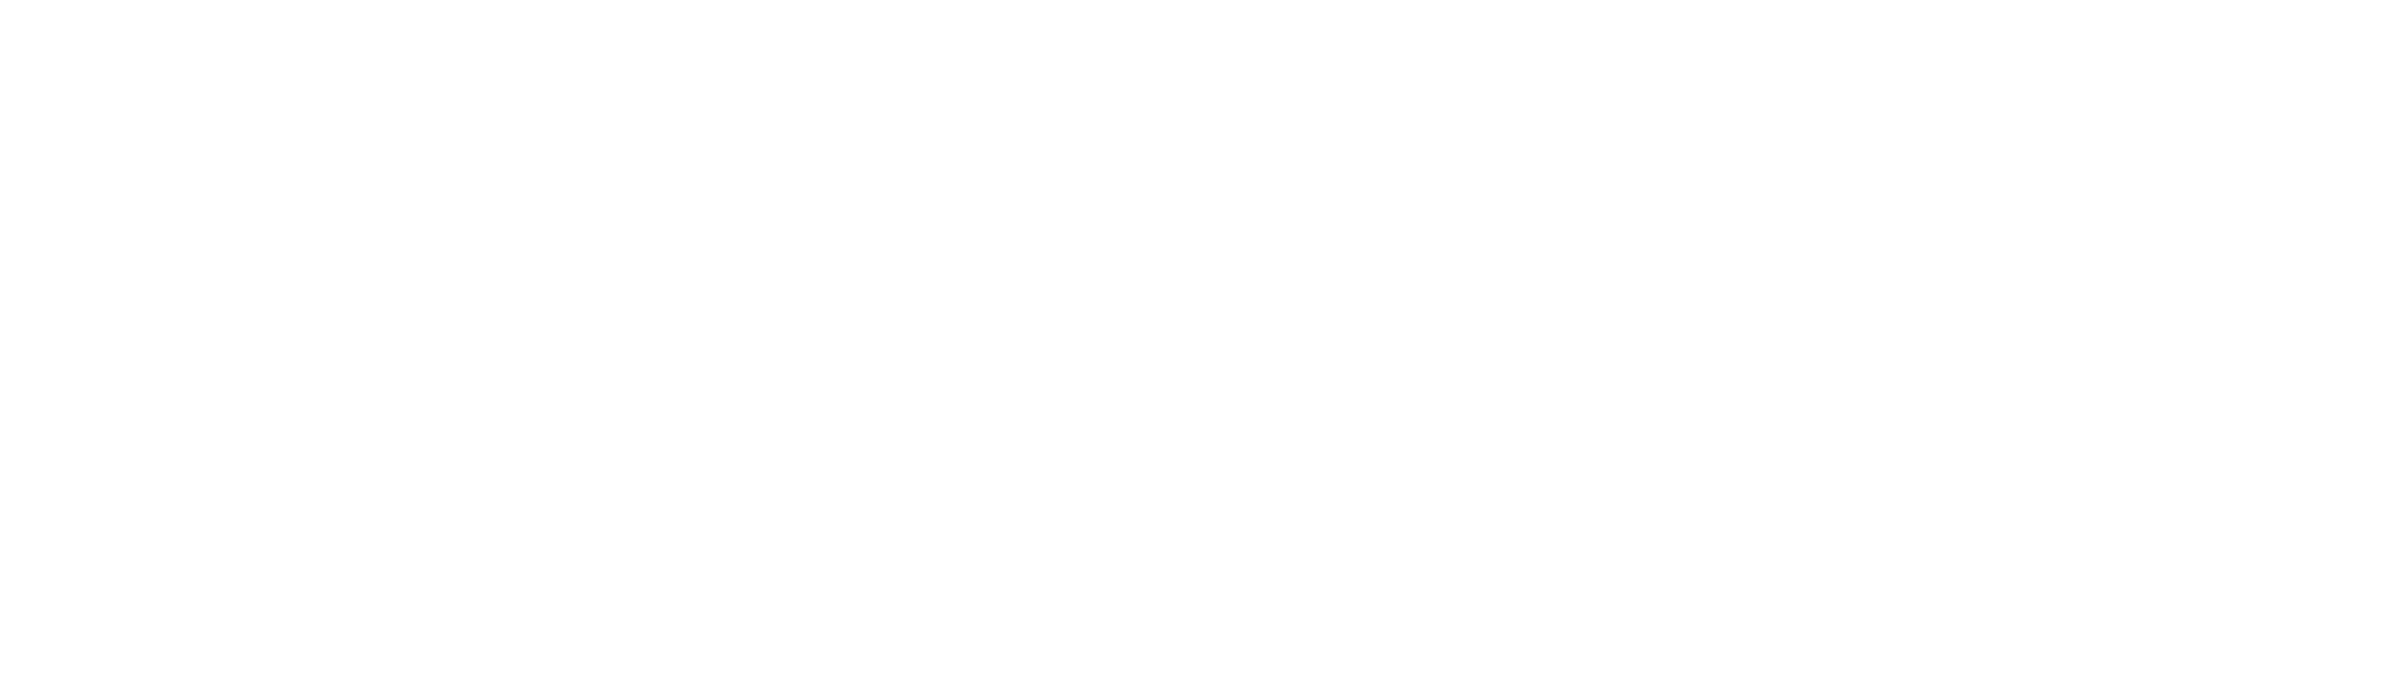 The Steinberg Law Firm: Get the firm behind you.